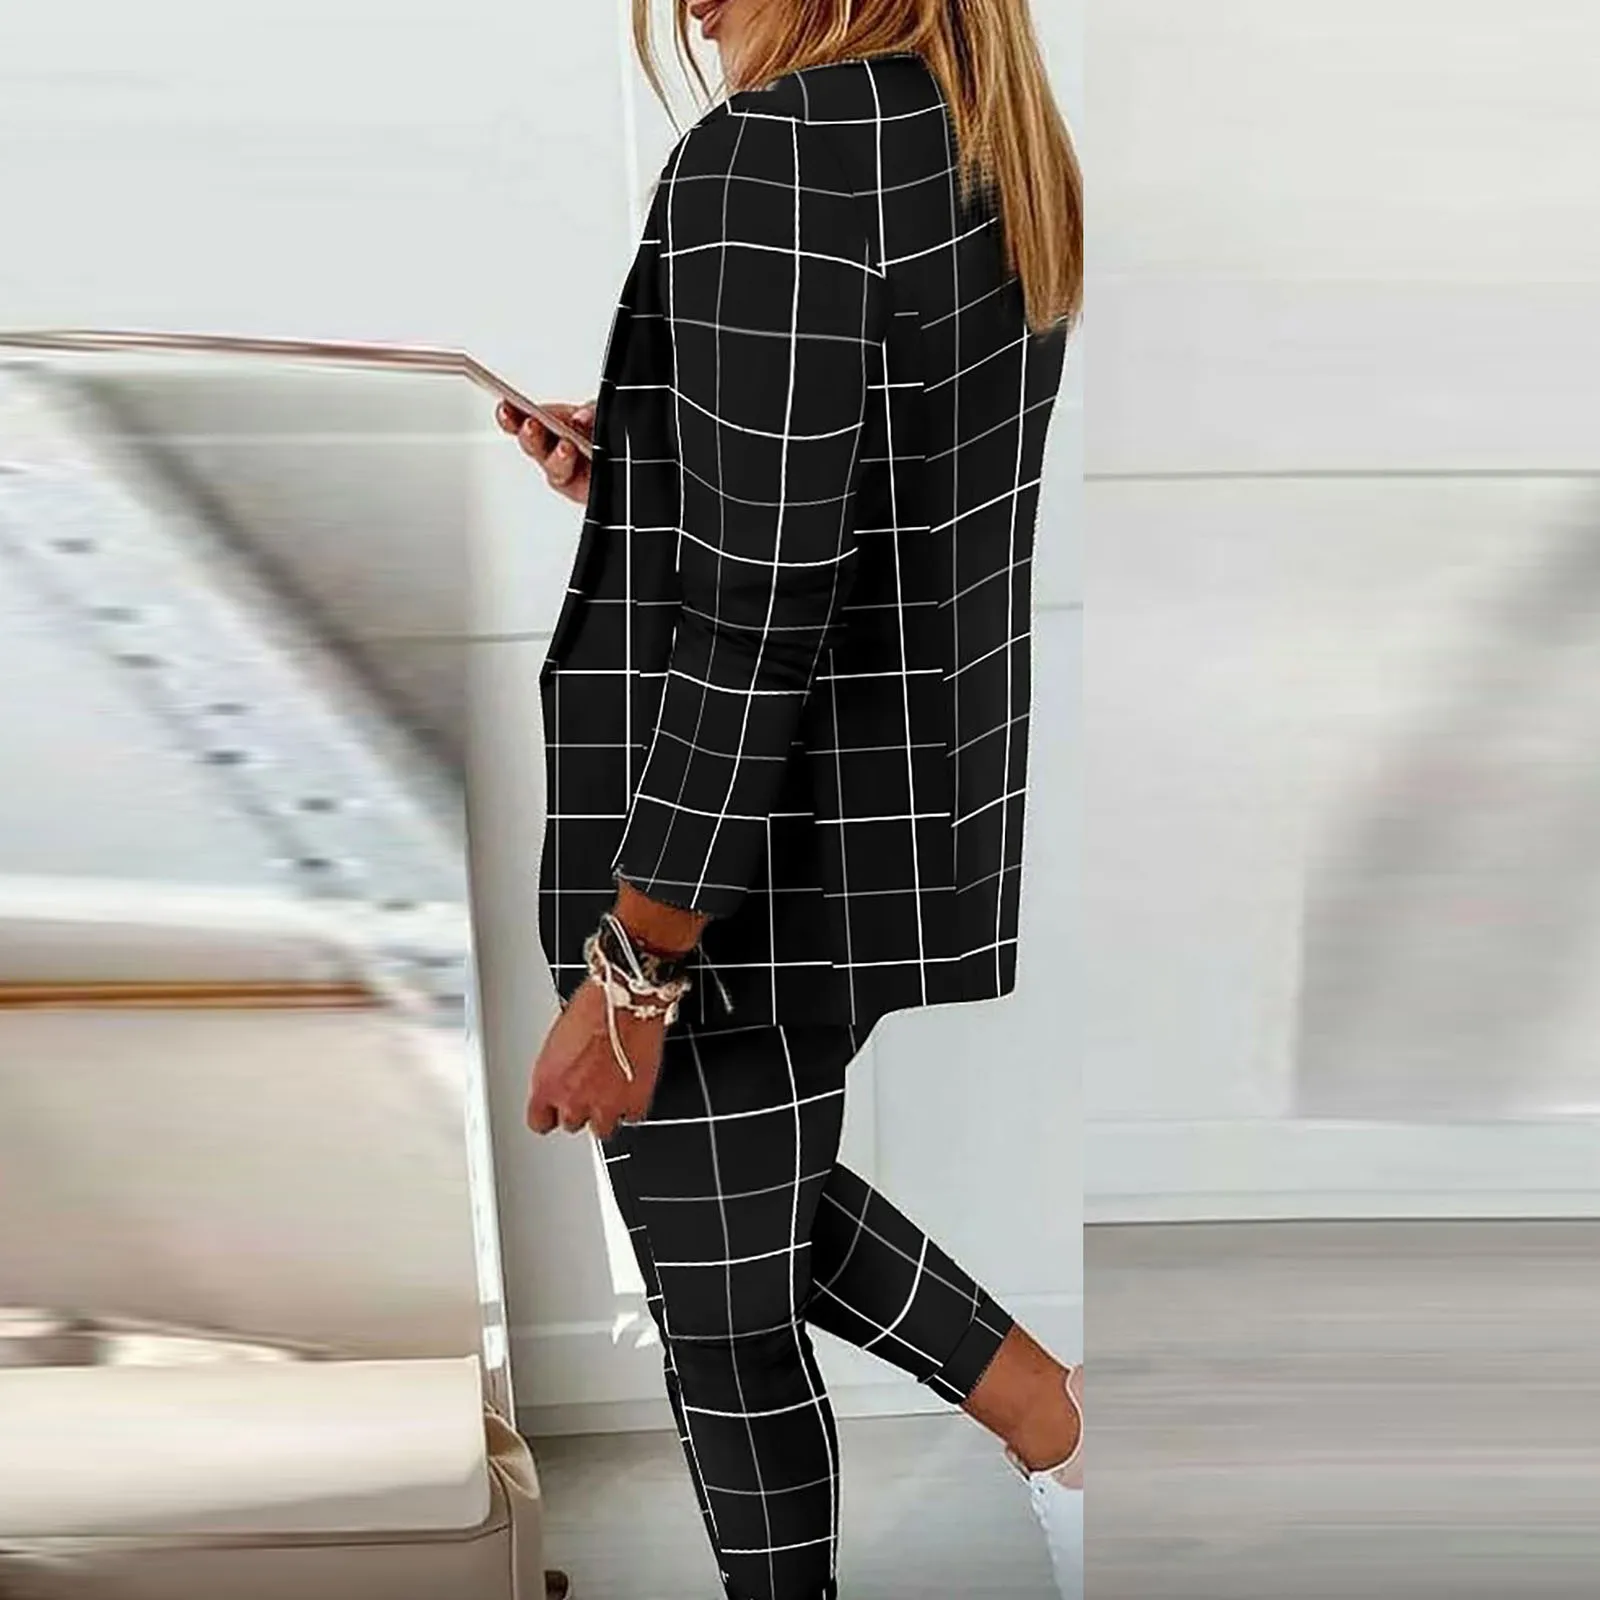 Women's Pant Suit Plaid Long-sleeved Fashion Jacket Casual, 48% OFF